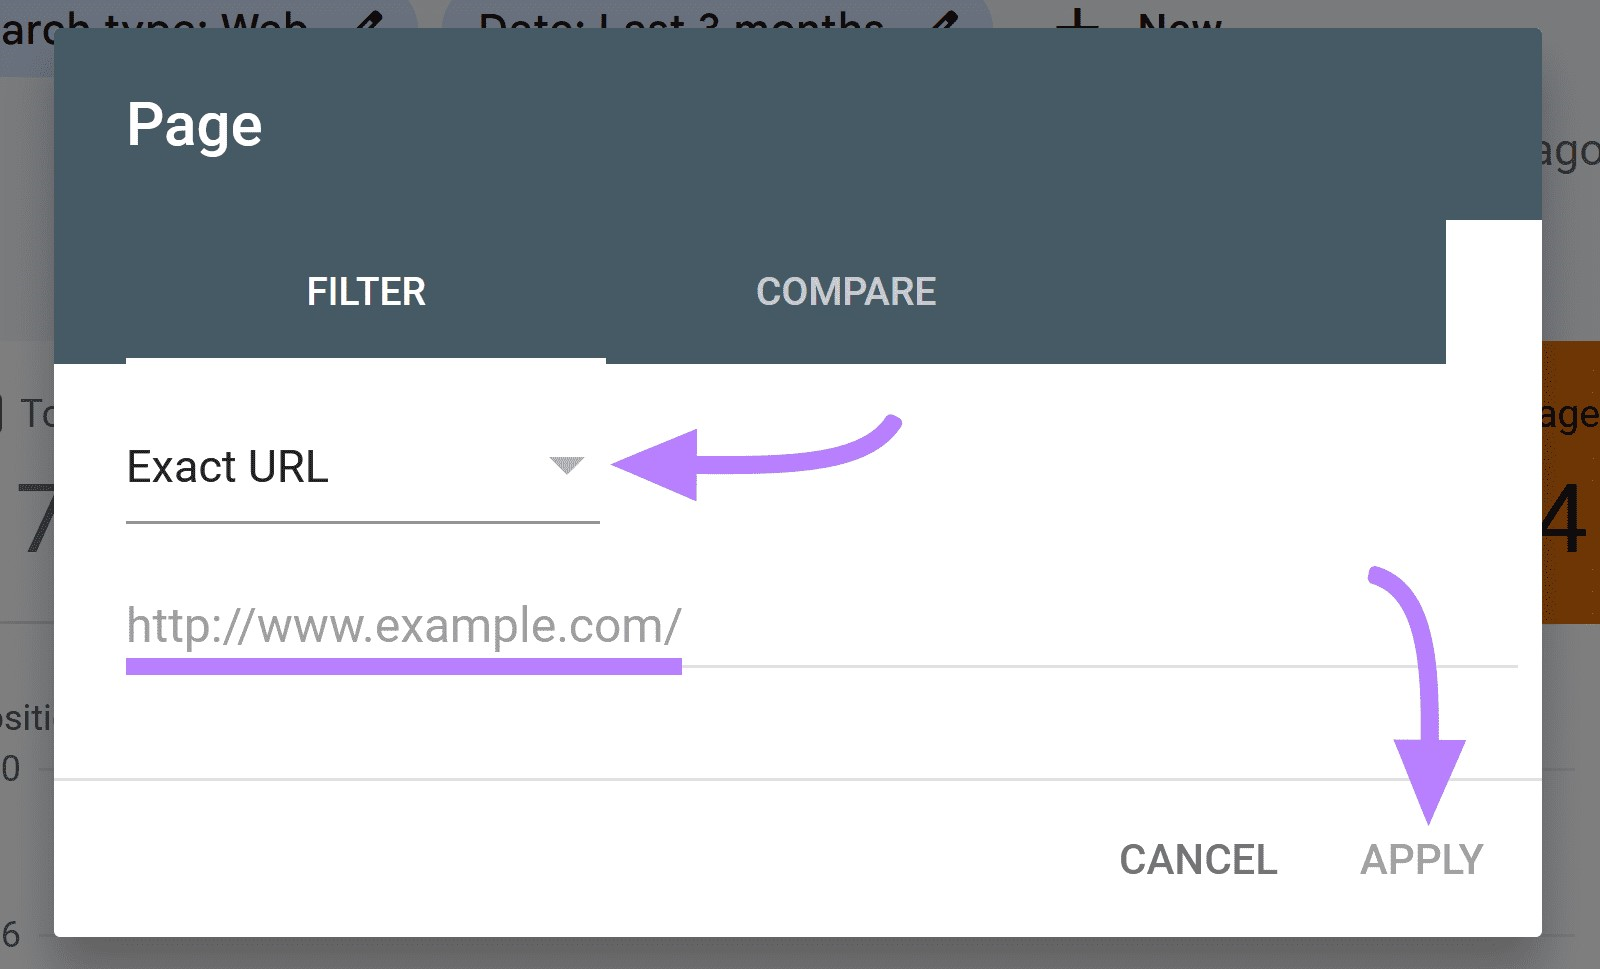 “Exact URL” selected from the drop-down and "Apply" button highlighted